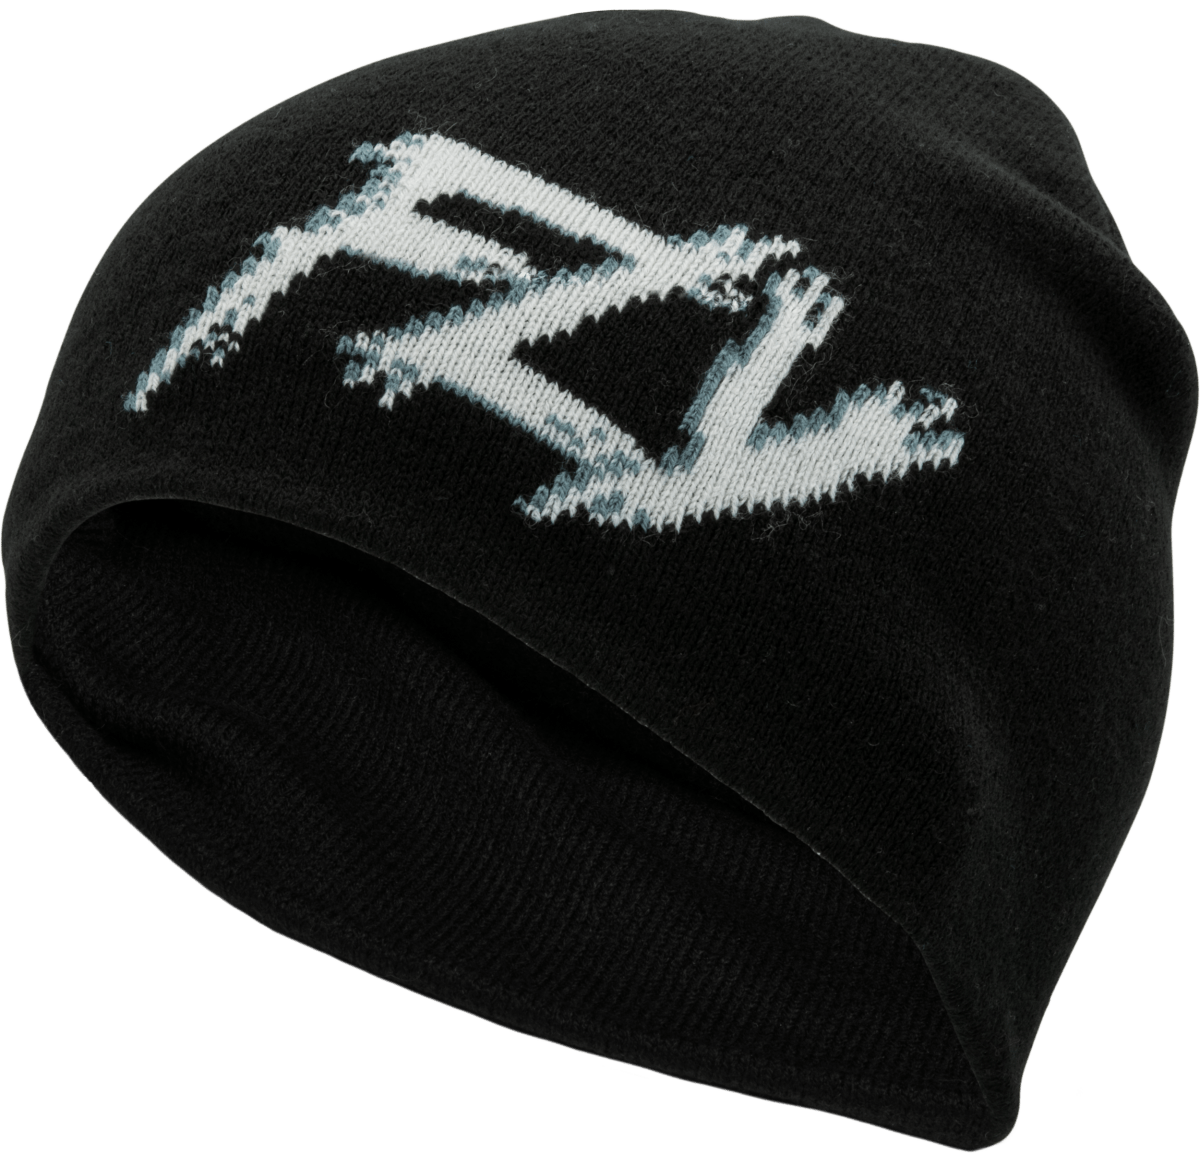 FLY RACING - FITTED BEANIE - 351-0009 - 191361356278